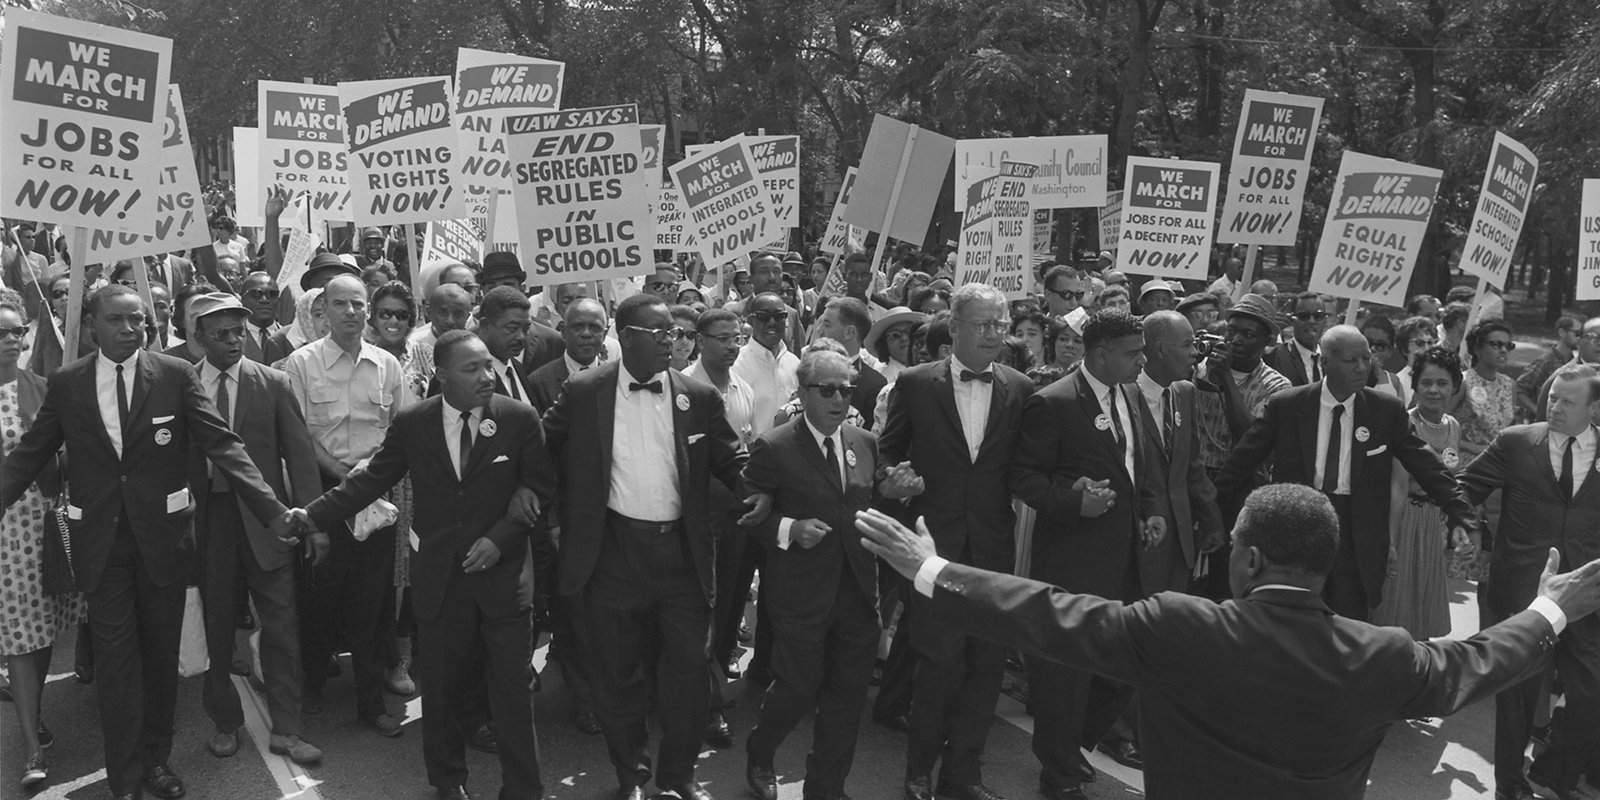 The March on Washington was about Civil and Workers’ Rights